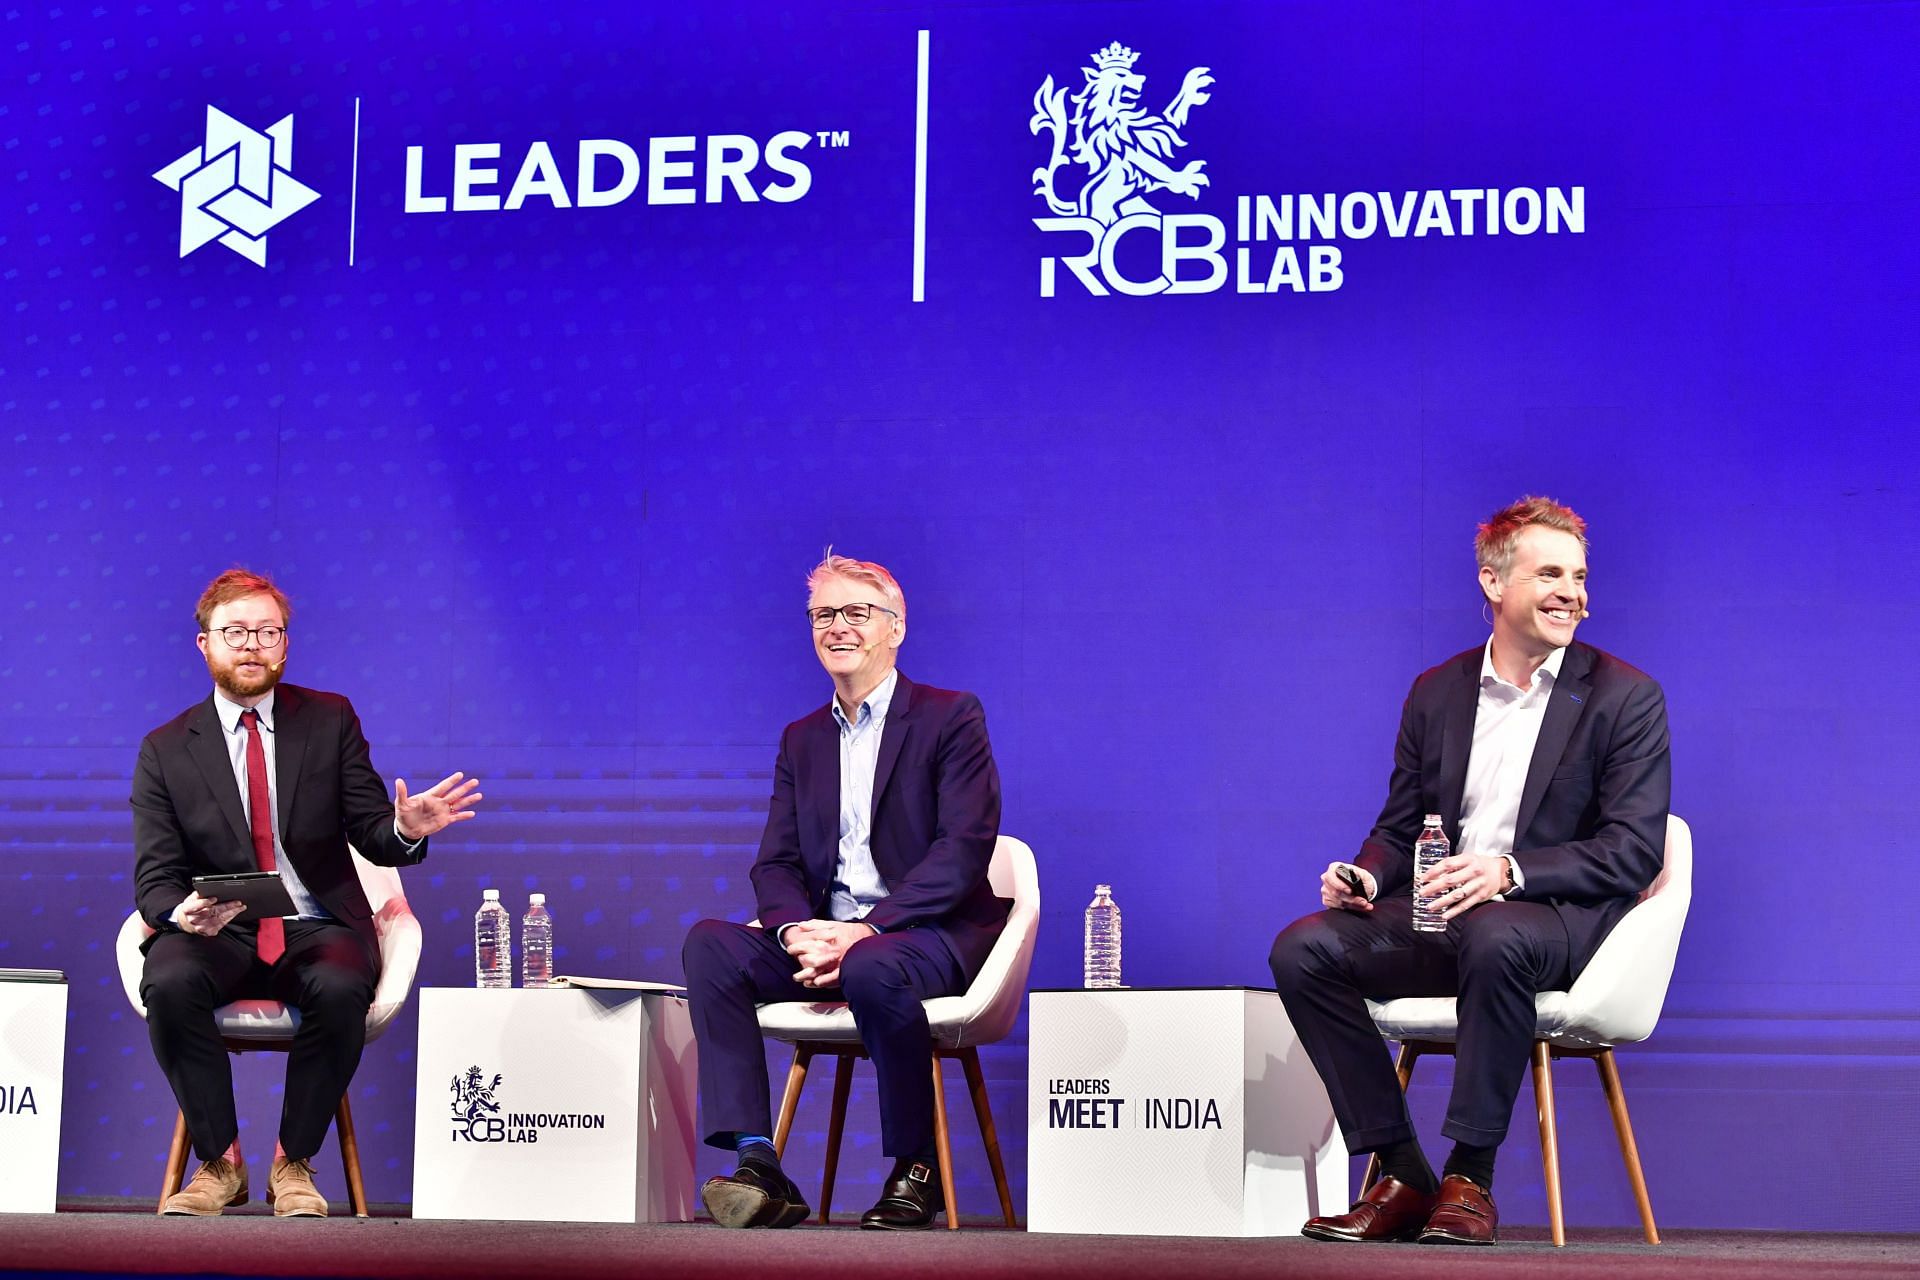 Mr. Nic Coward (centre) and Mr. Will Brass (right) speaking at RCB Innovation Lab